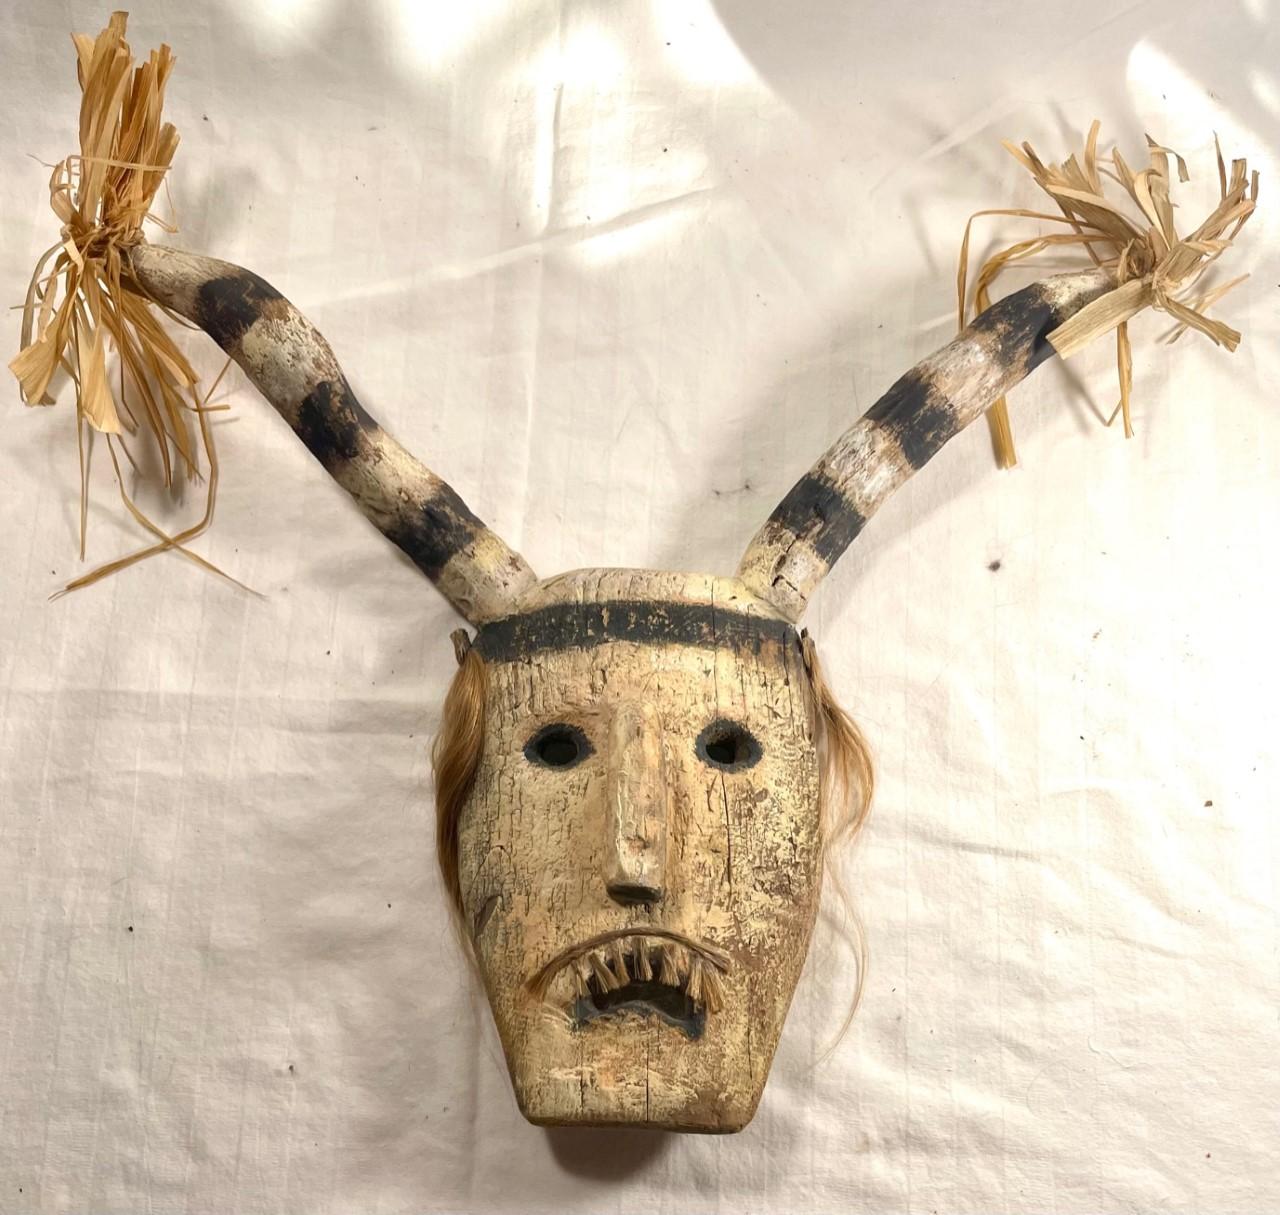 Native American Hopi Pueblo Clown Kachina Mask. Ethnographic Hand Painted Folk Art Collectible.

Vintage Hopi Pueblo Clown Kachina mask made from cottonwood. It is painted with pigments in black and white shades, with added hair and plant fringes.